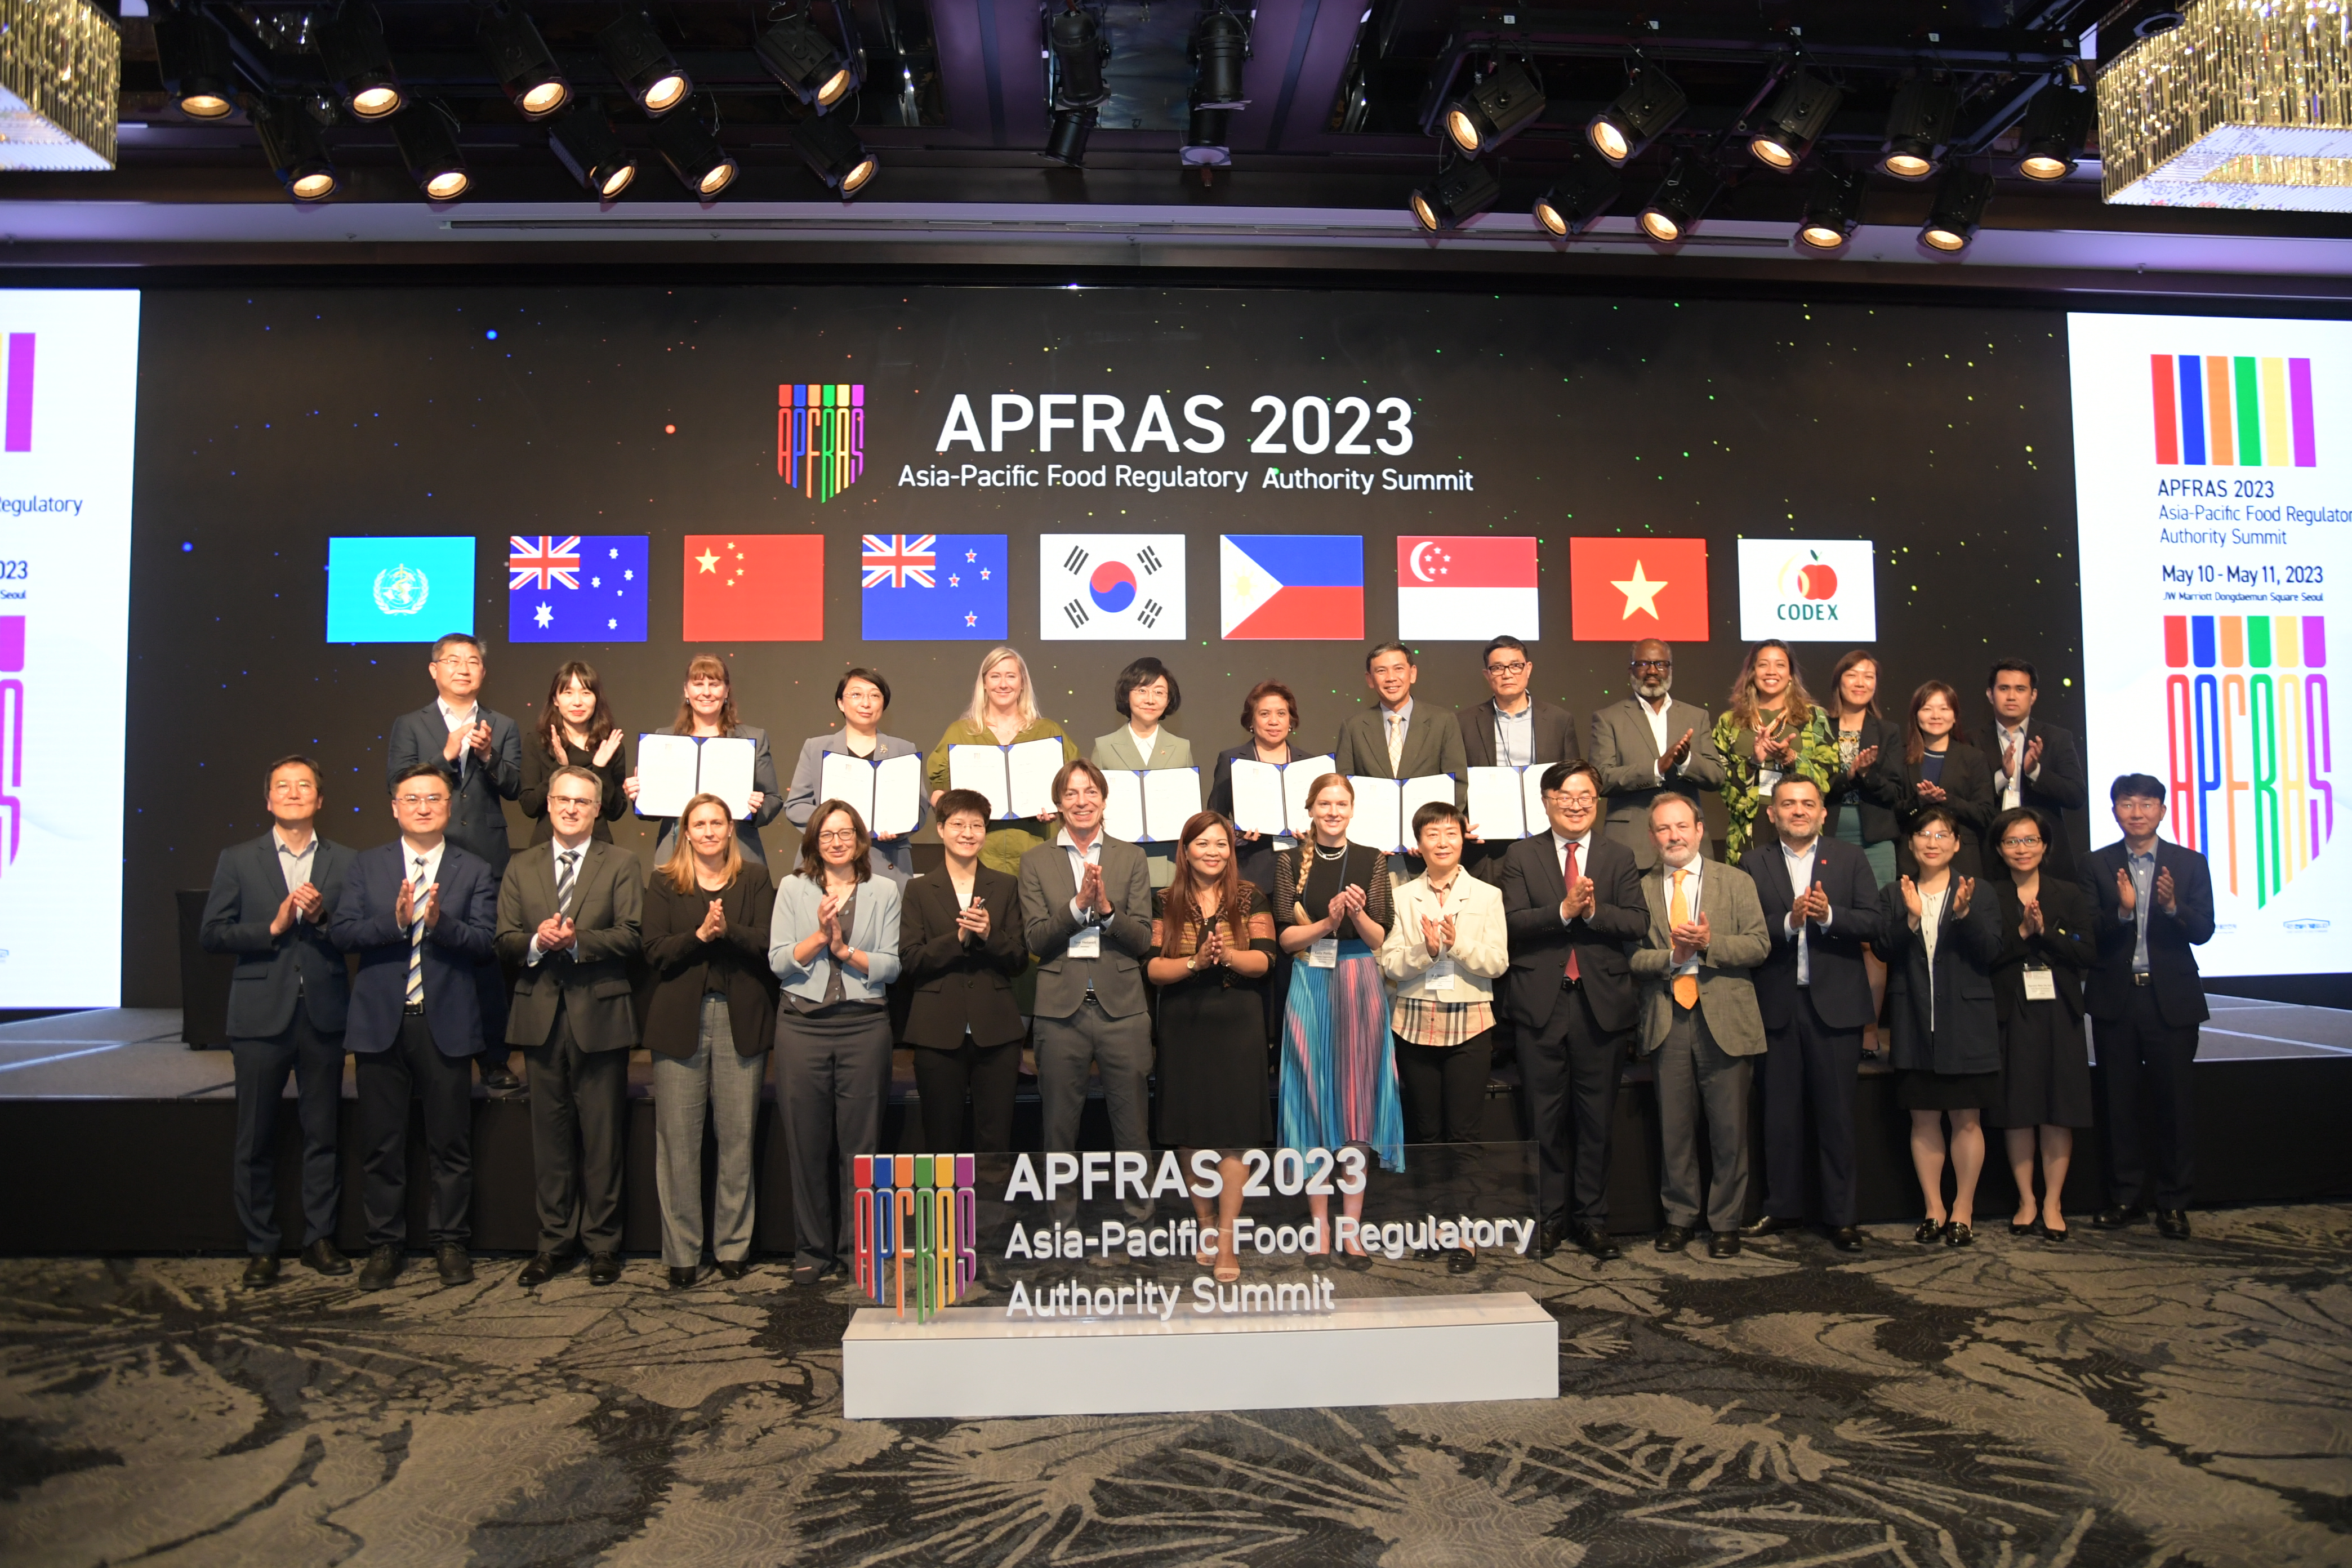 Photo News5 - [May 11, 2023] Minister Attends First Asia-Pacific Food Regulatory Authority Summit (APFRAS 2023) 